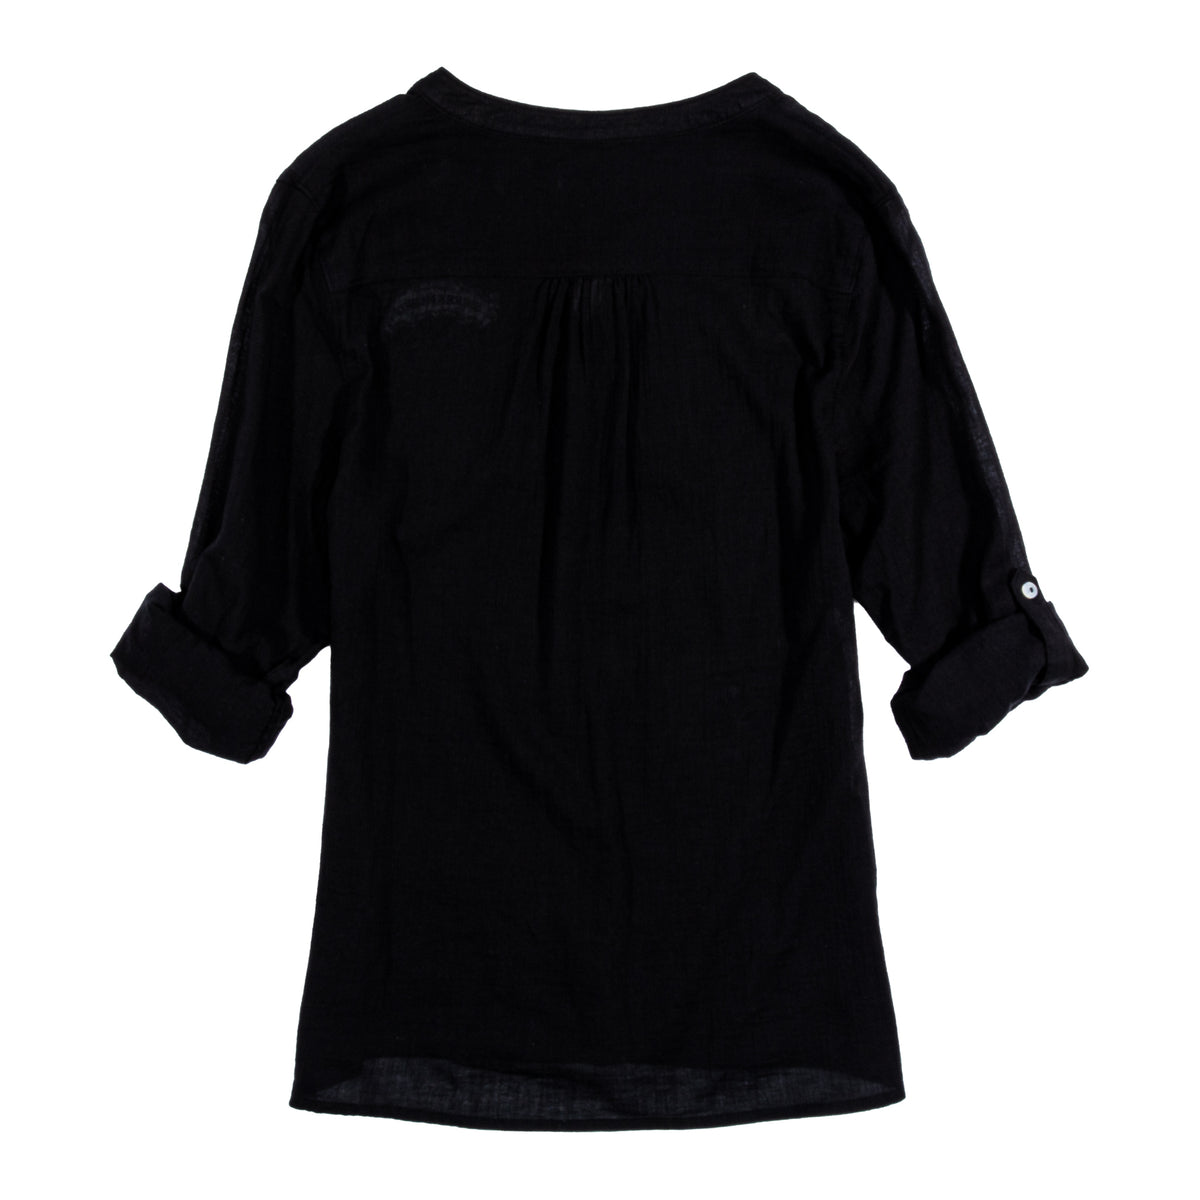 Women's Carve Dylan 3/4 Sleeve Top